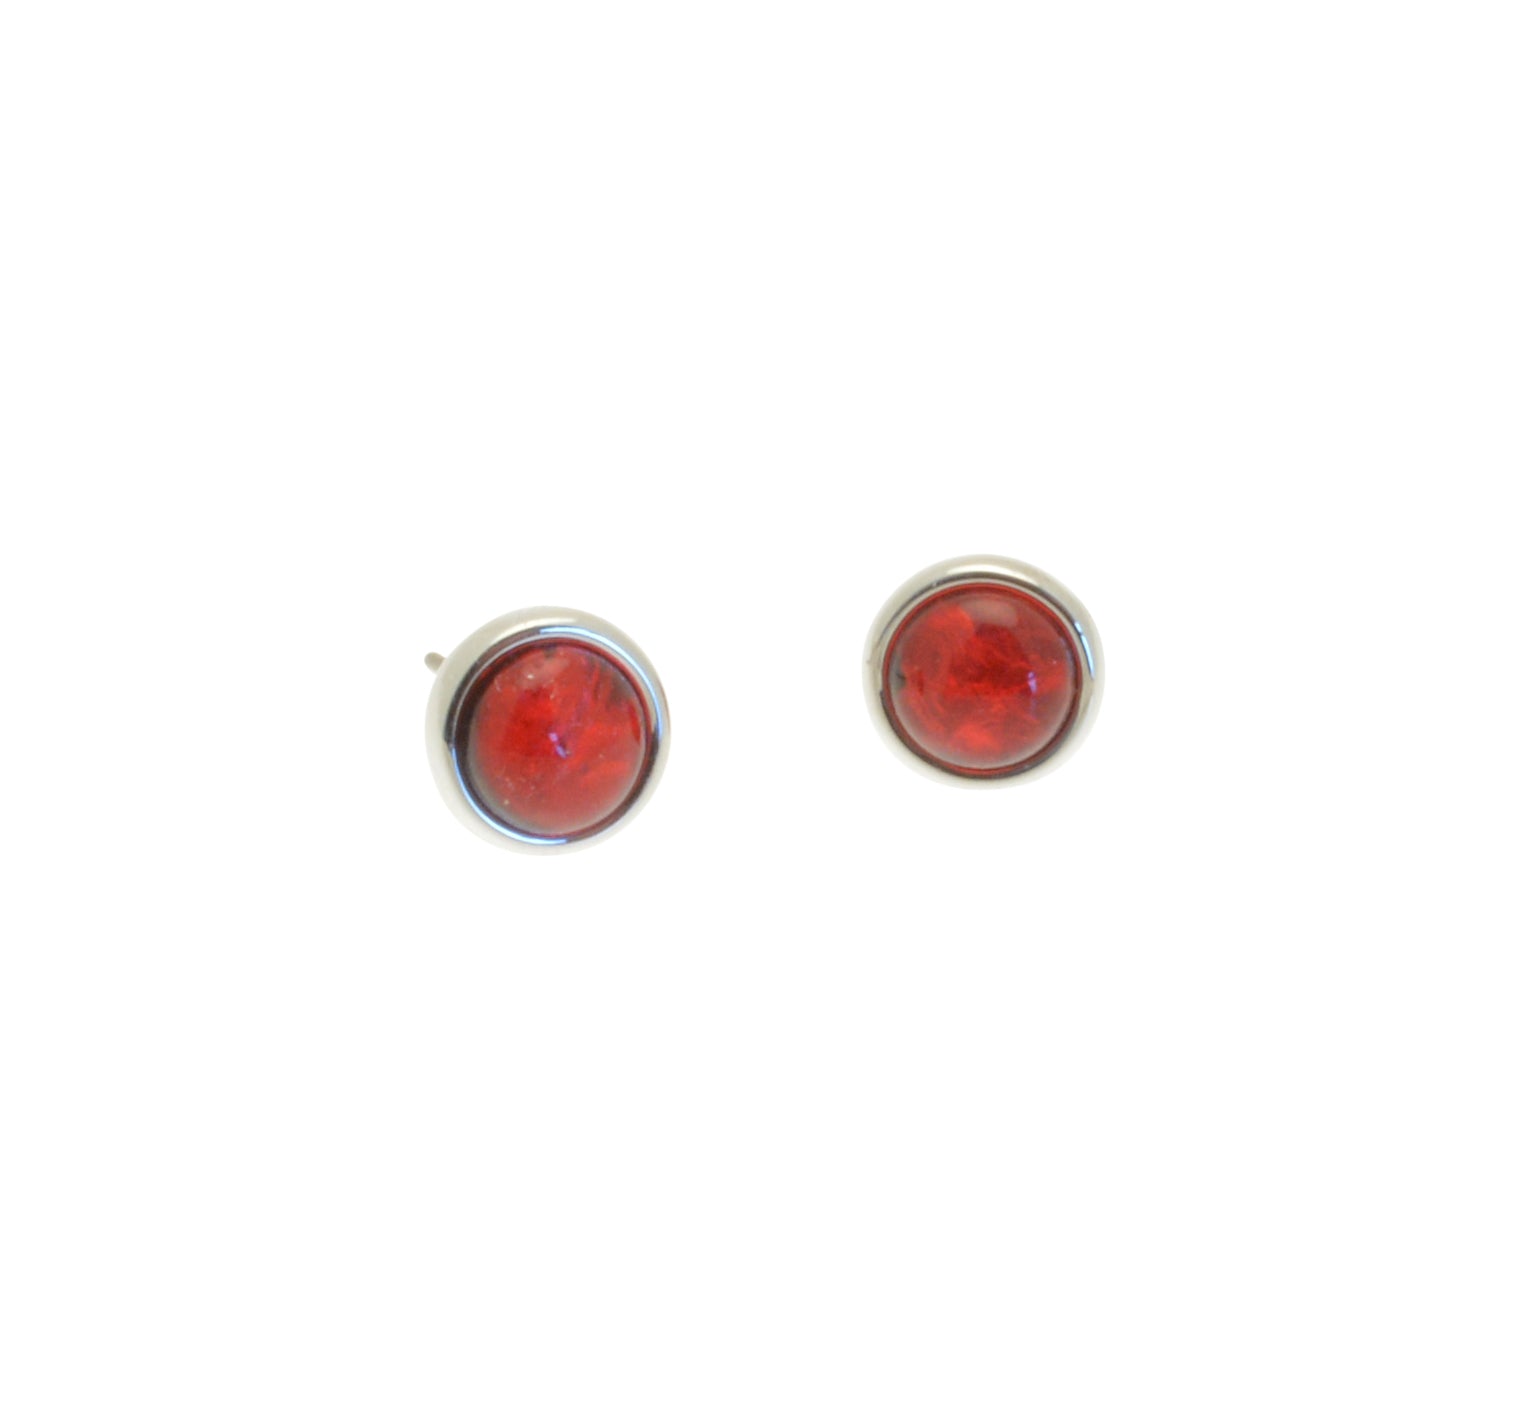 Love the classic look? Get timeless style with a modern twist with our Red Foil Resin Stud Earrings! Made with eye-catching red resin and a textured aluminum foil backing, these statement studs feature a gleaming silver surround. Elevate your look with this must-have accessory!  Approx 0.9cm in diameter, attached to posts and butterflies.